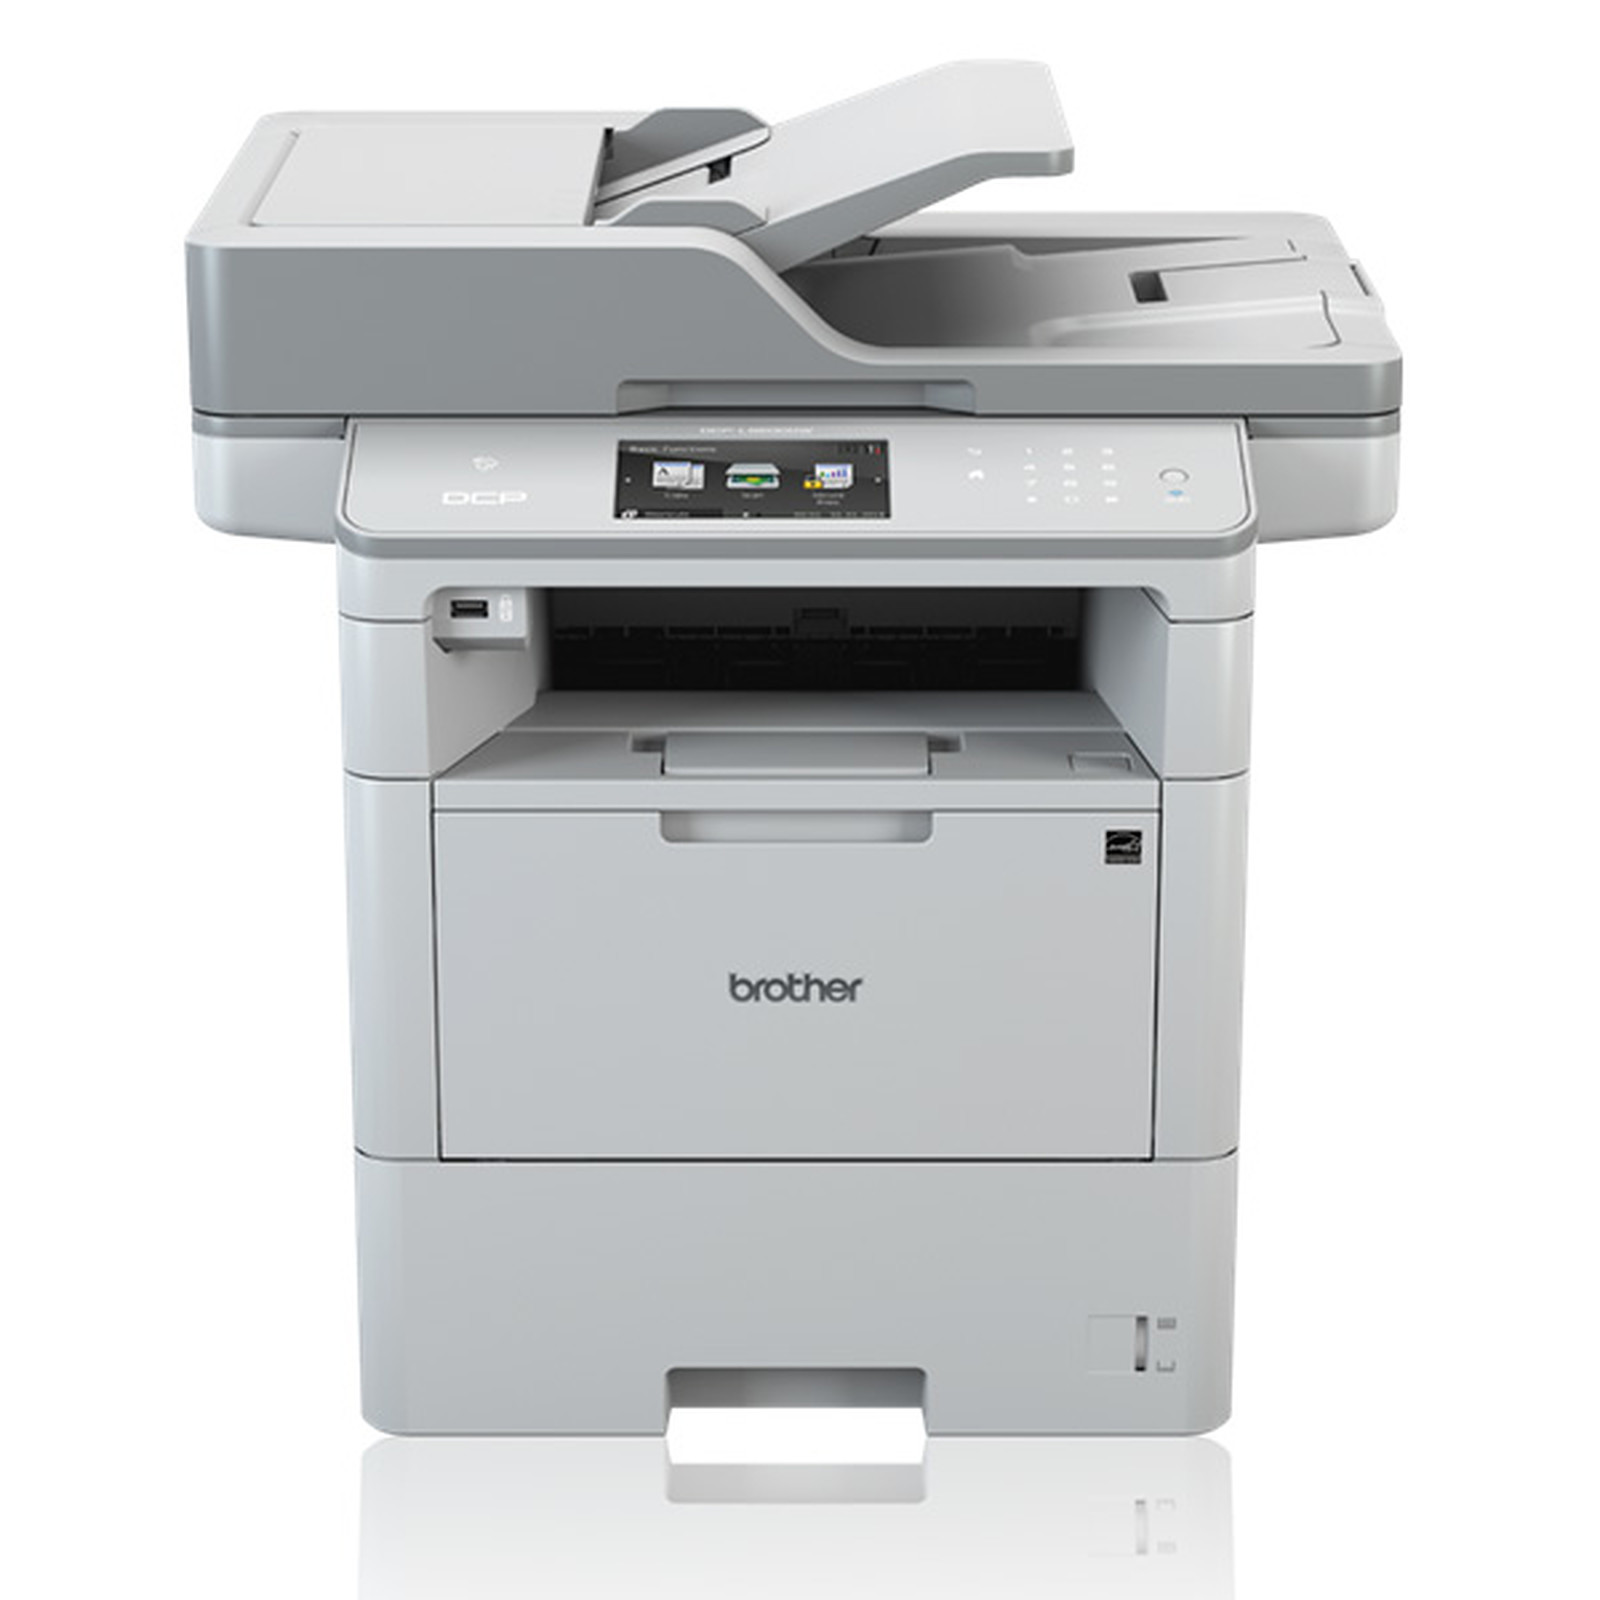 Brother DCP-L6600DW - Imprimante multifonction Brother